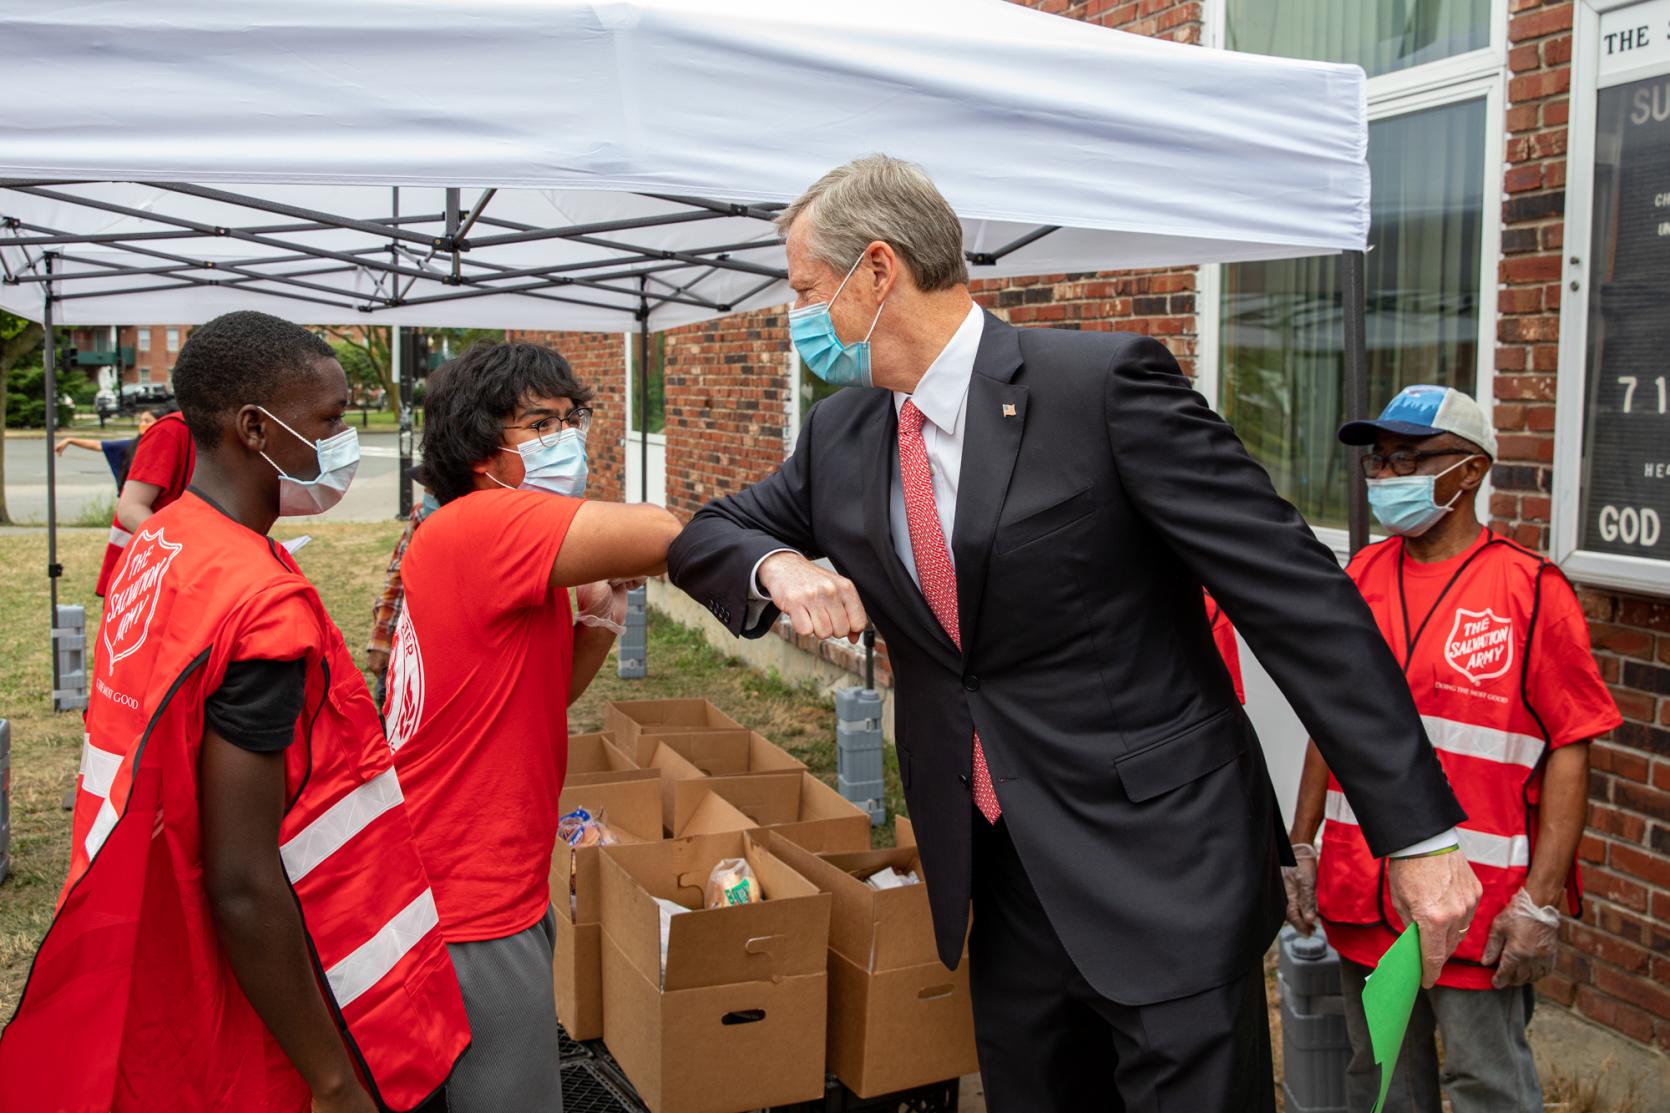 Baker-Polito Administration Awards $3 Million in Food Security Grants